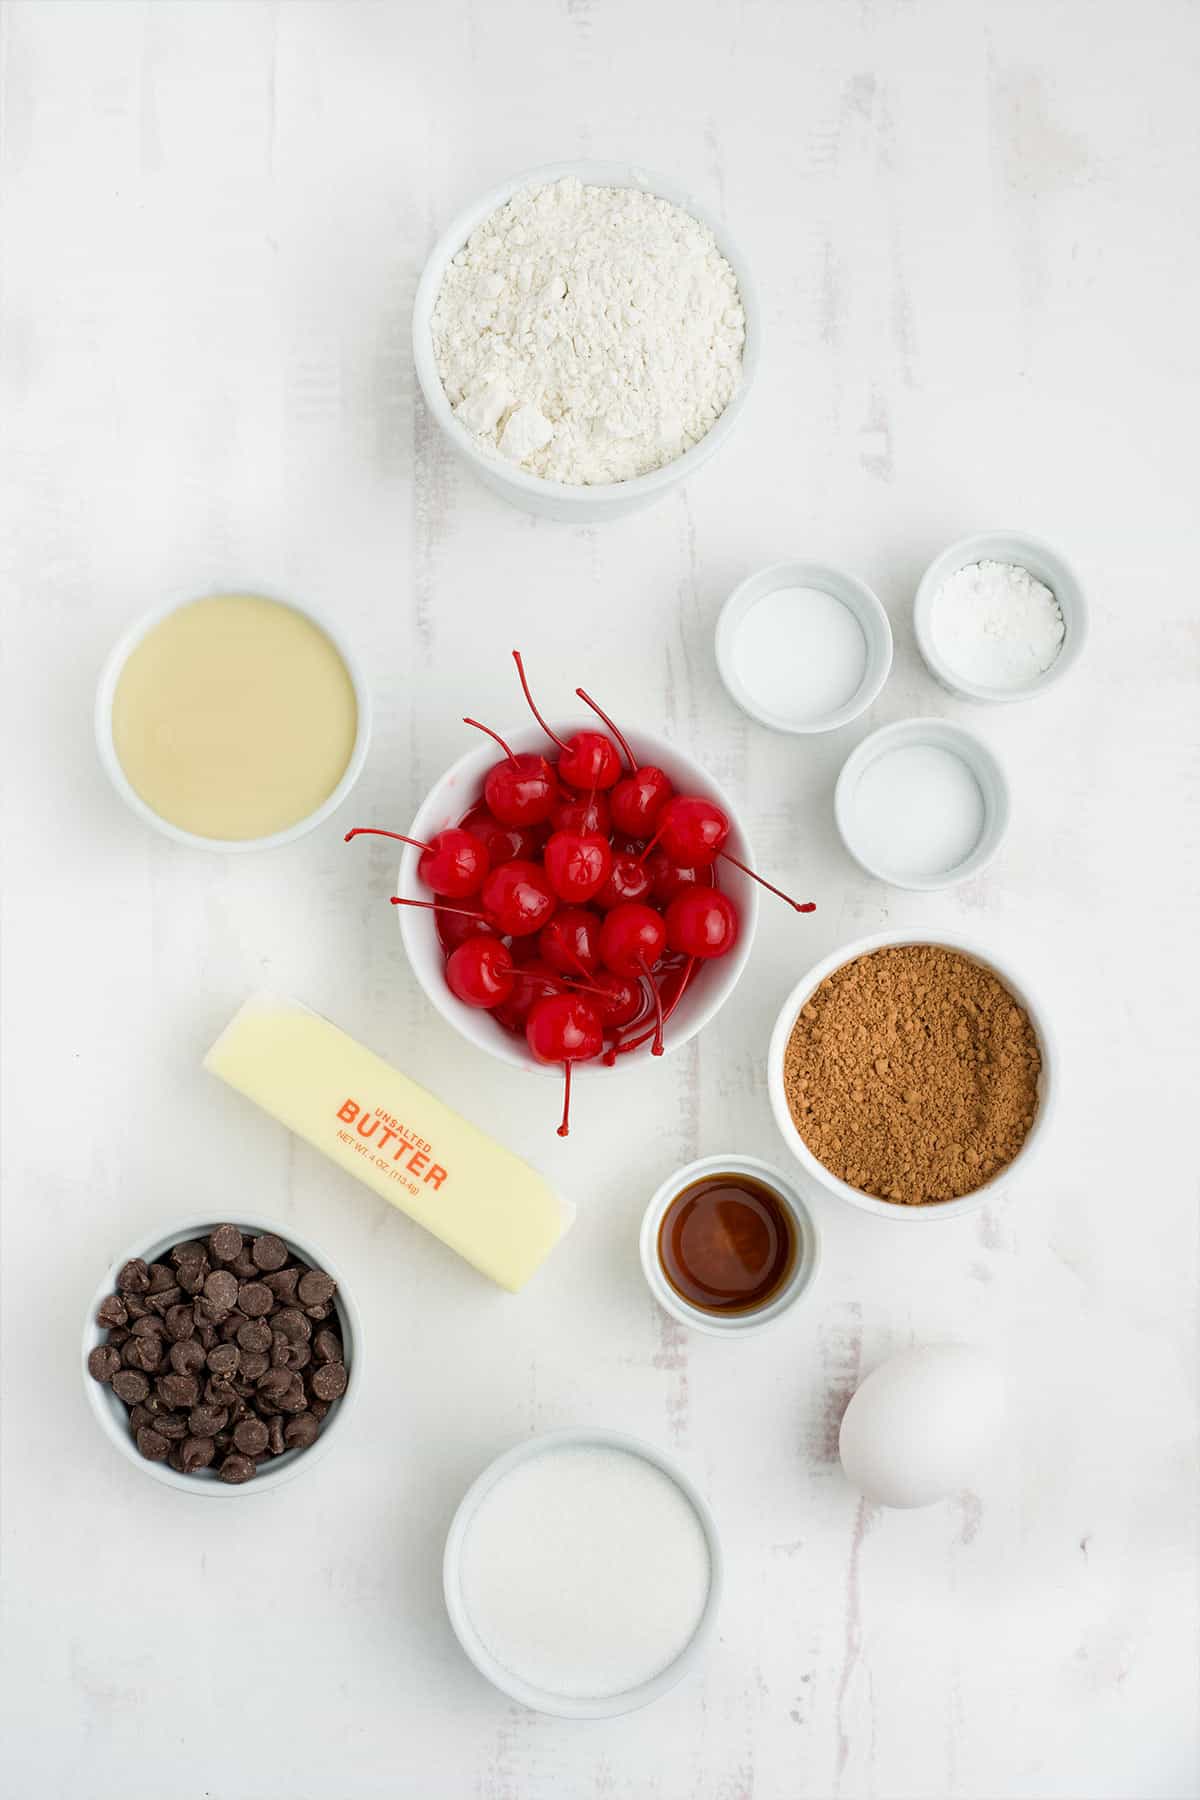 Ingredients to make chocolate cherry cookies on the table.